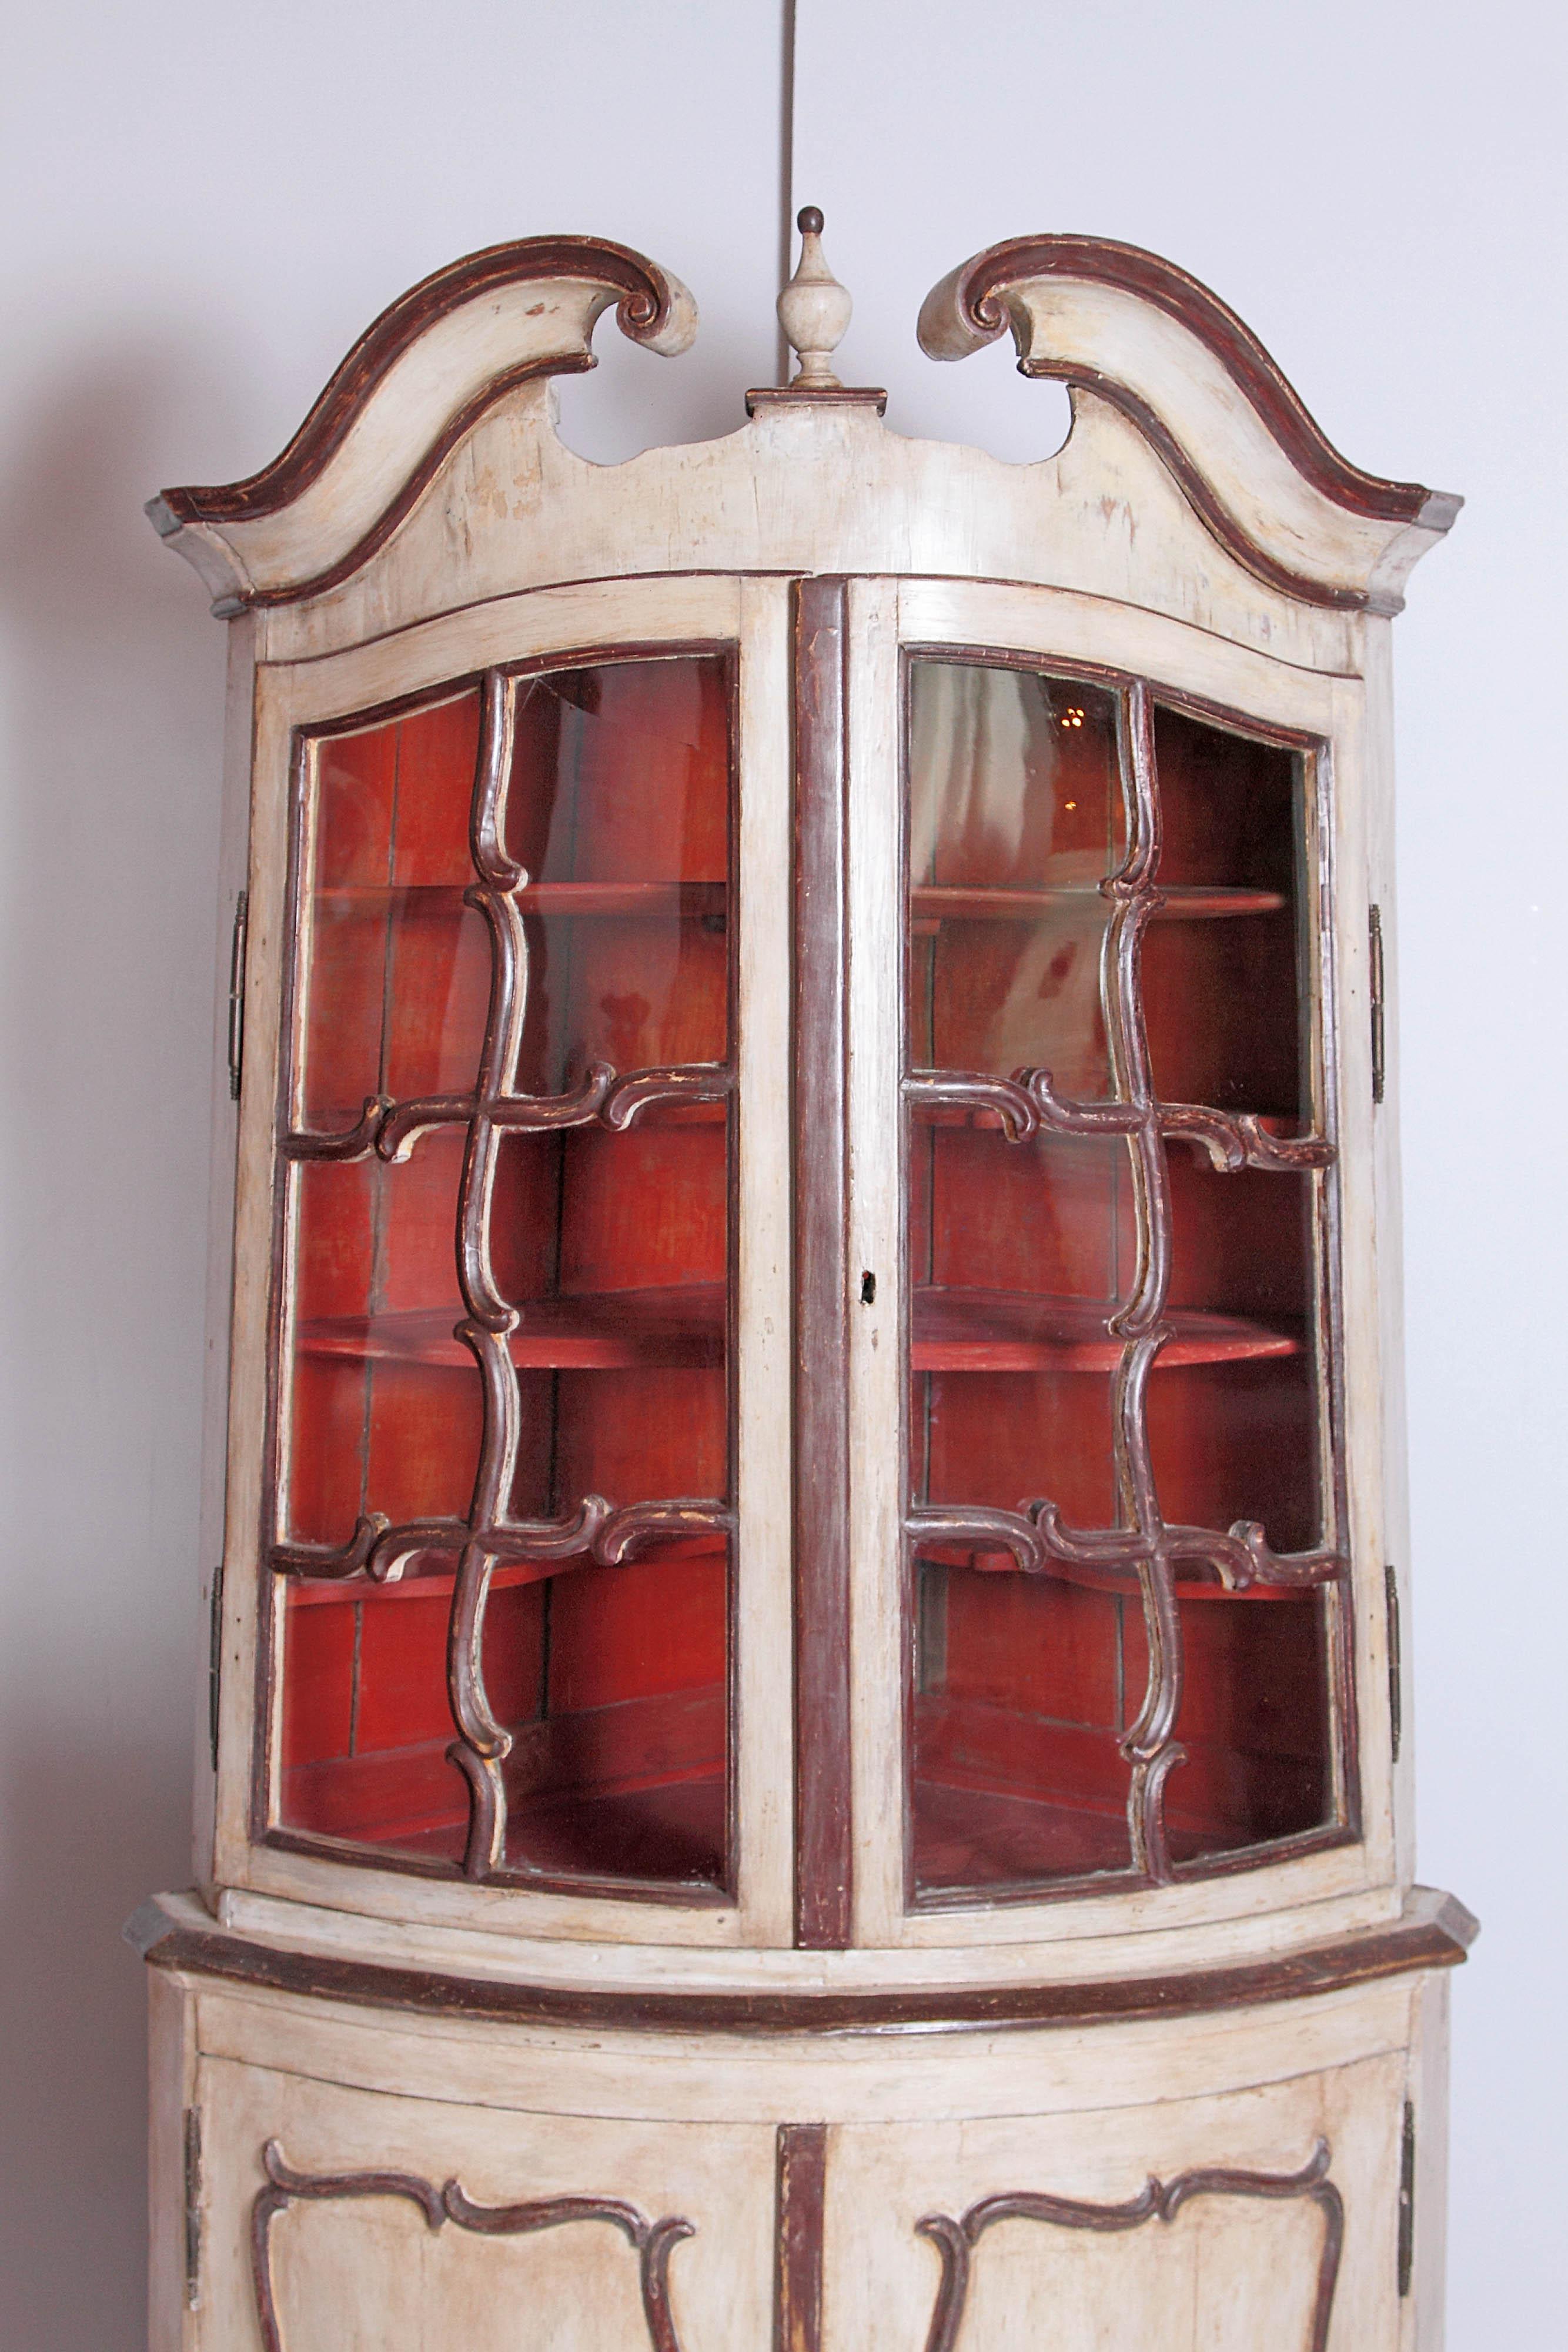 Painted cream with reddish brown trim molding on a bow front corner cabinet with curved glass doors. The cabinet has a split pediment top and urn finial. Behind the glass doors is a painted Asian red interior with four shelves. Below are two doors